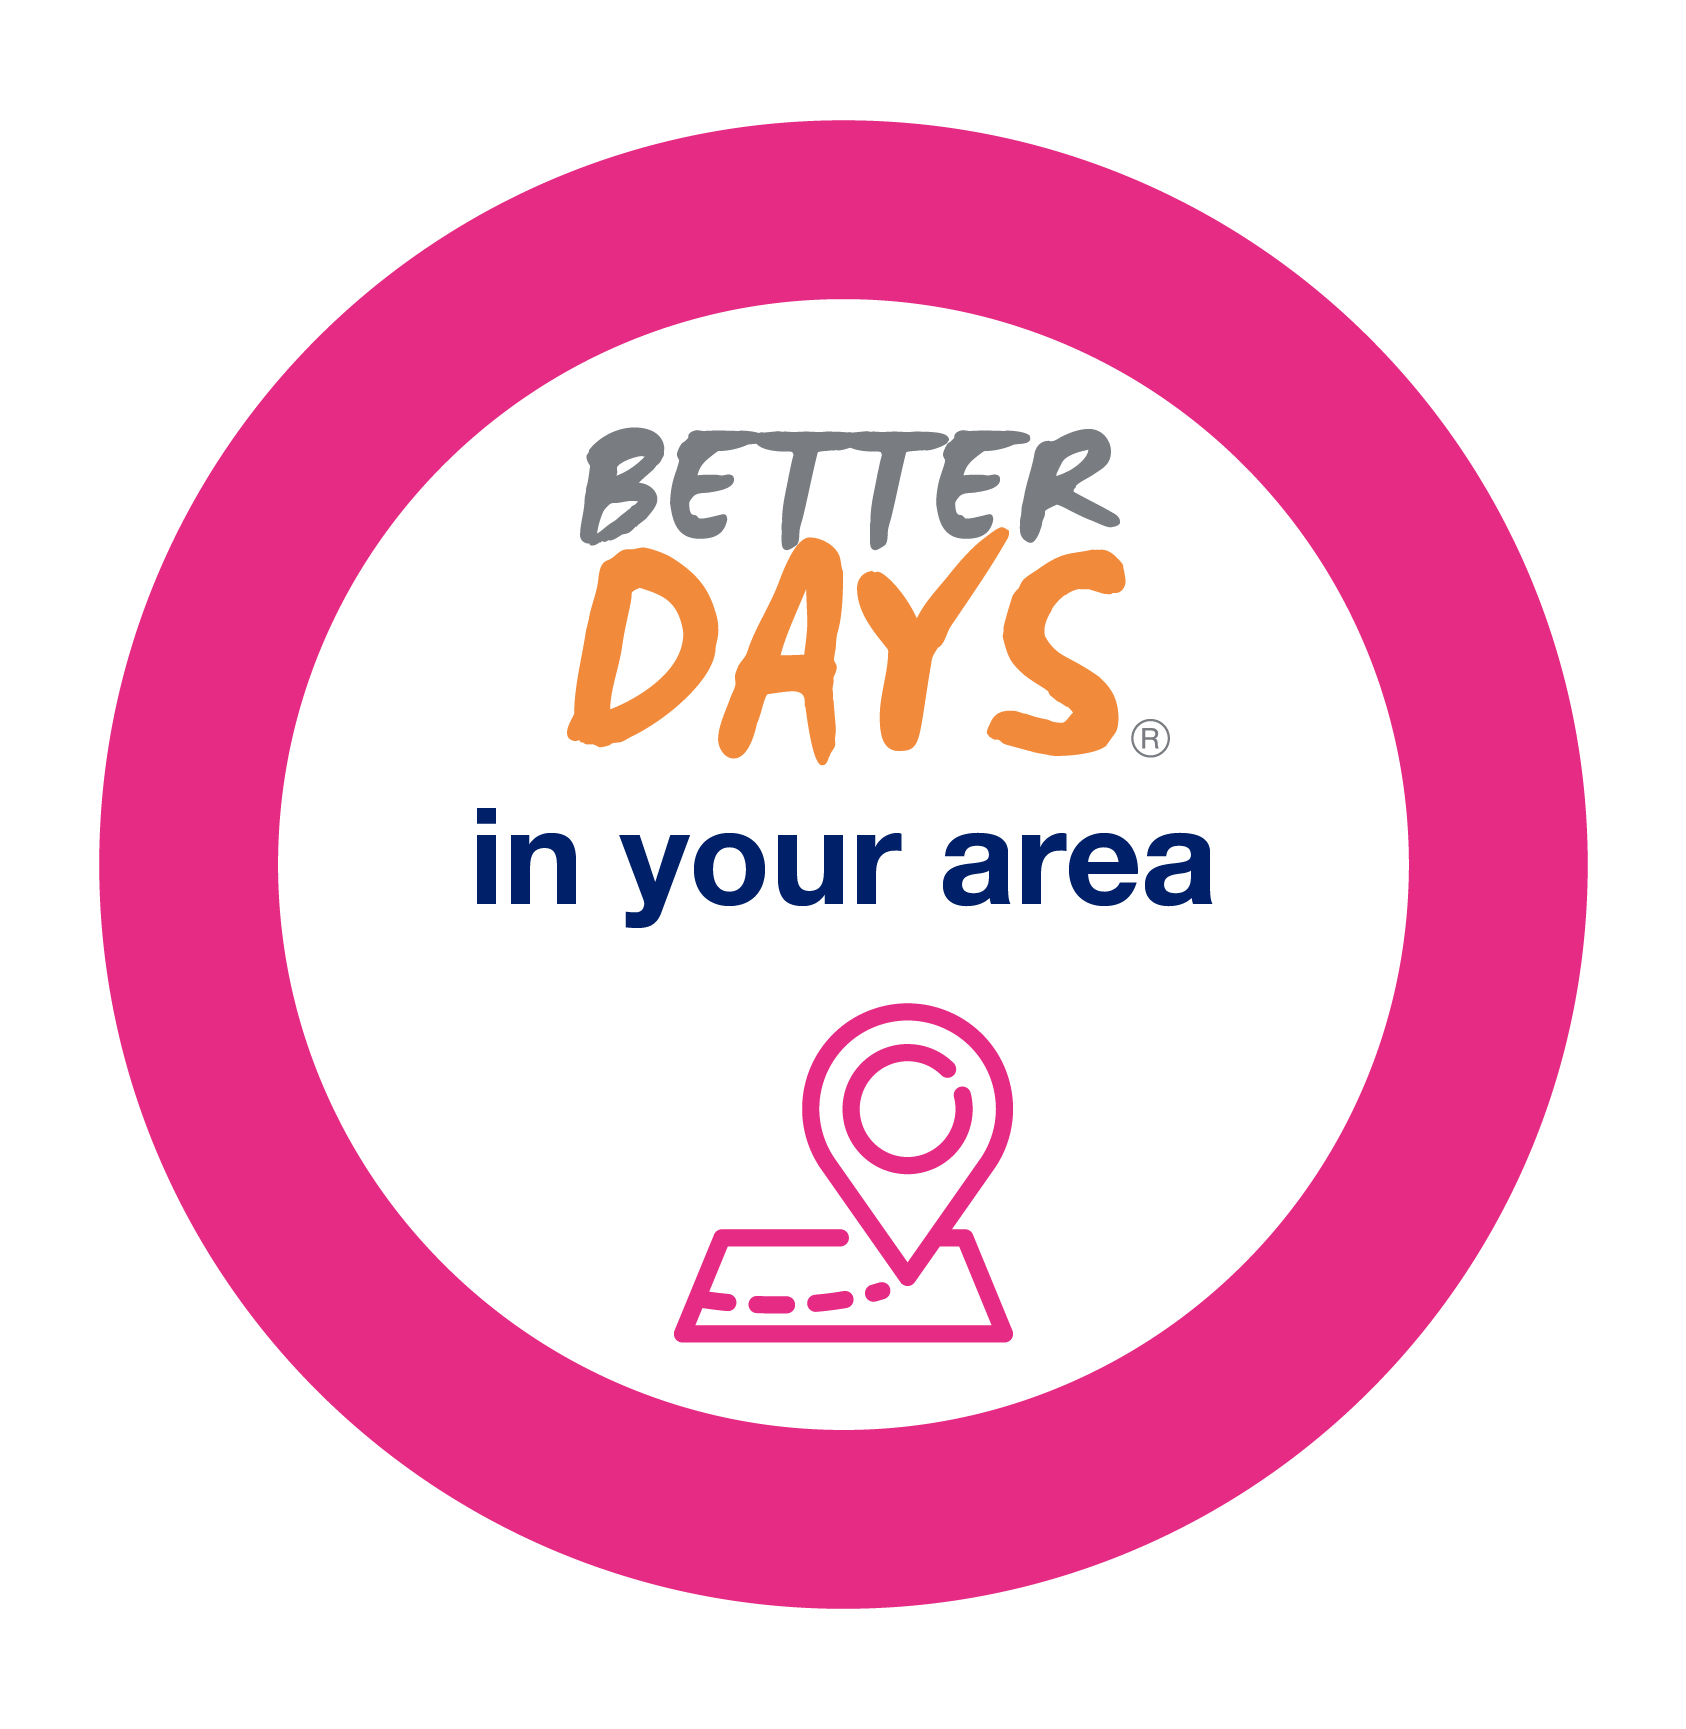 Better Days in your area icon